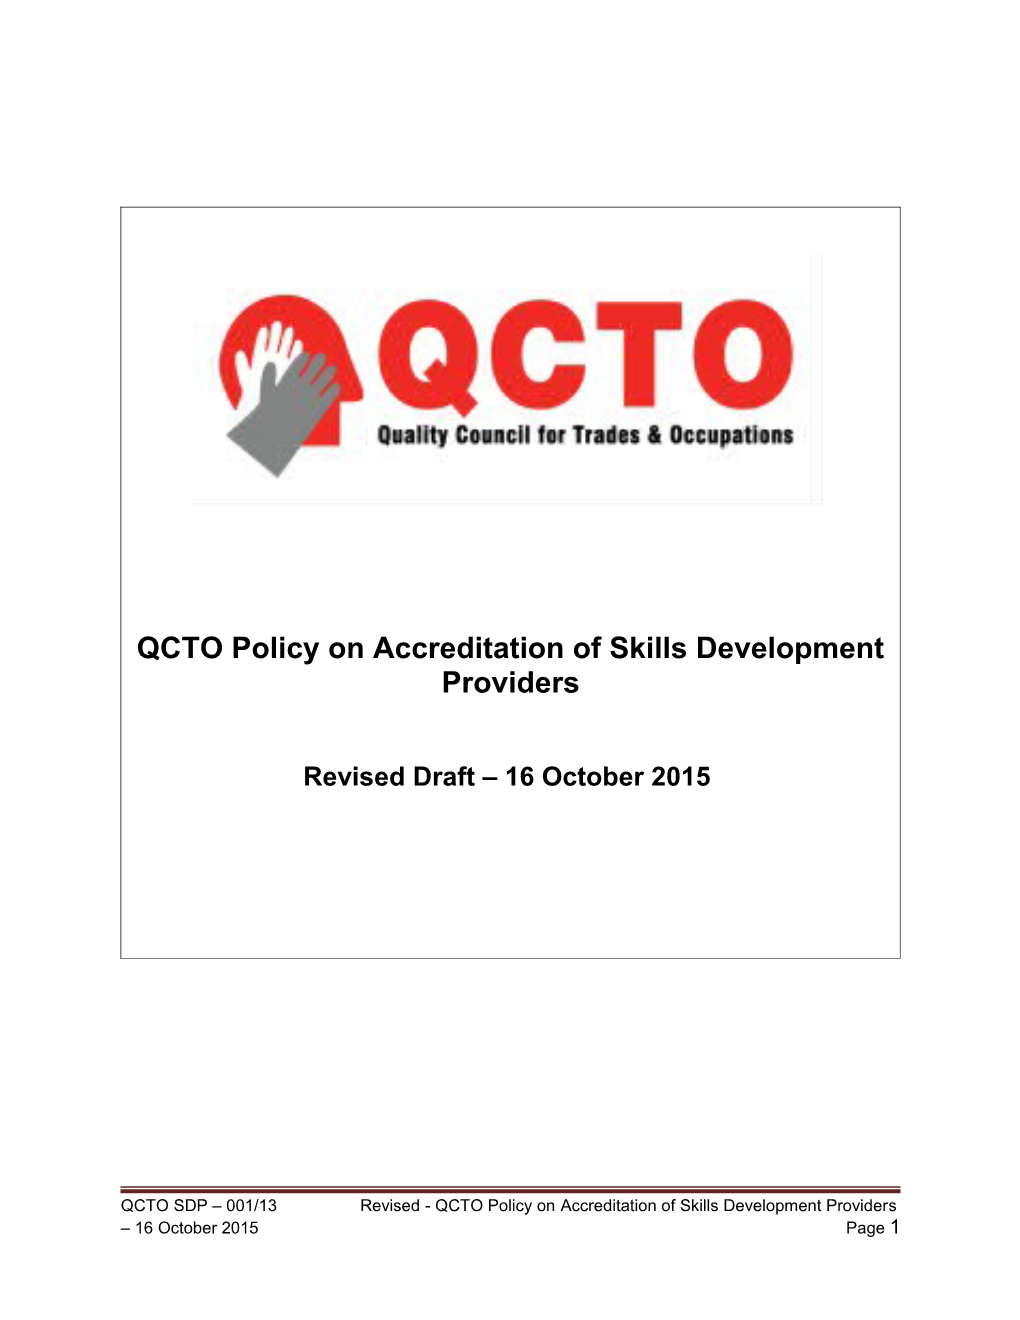 QCTO Policy on Accreditation of Skills Development Providers